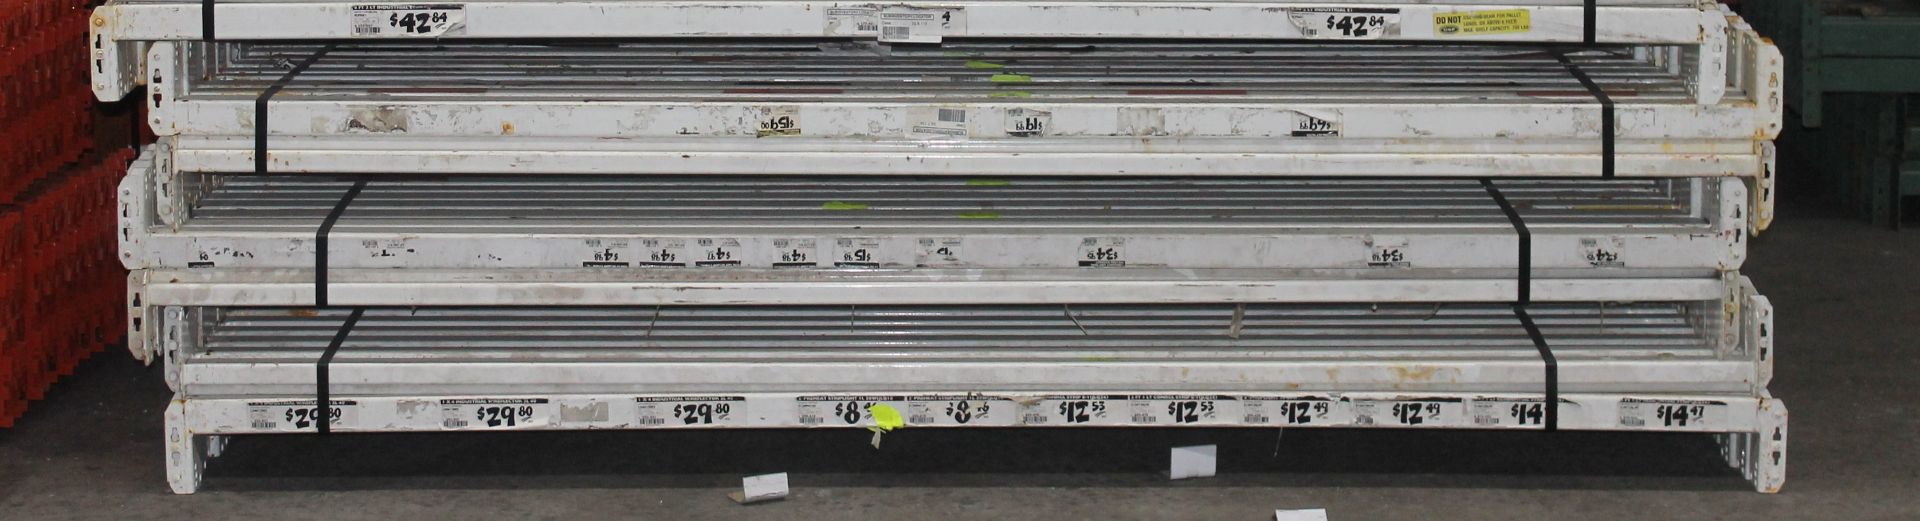 8 SECTIONS OF 192"H X 36"D X 99"L TEARDROP STYLE PALLET RACKS, - Image 2 of 3